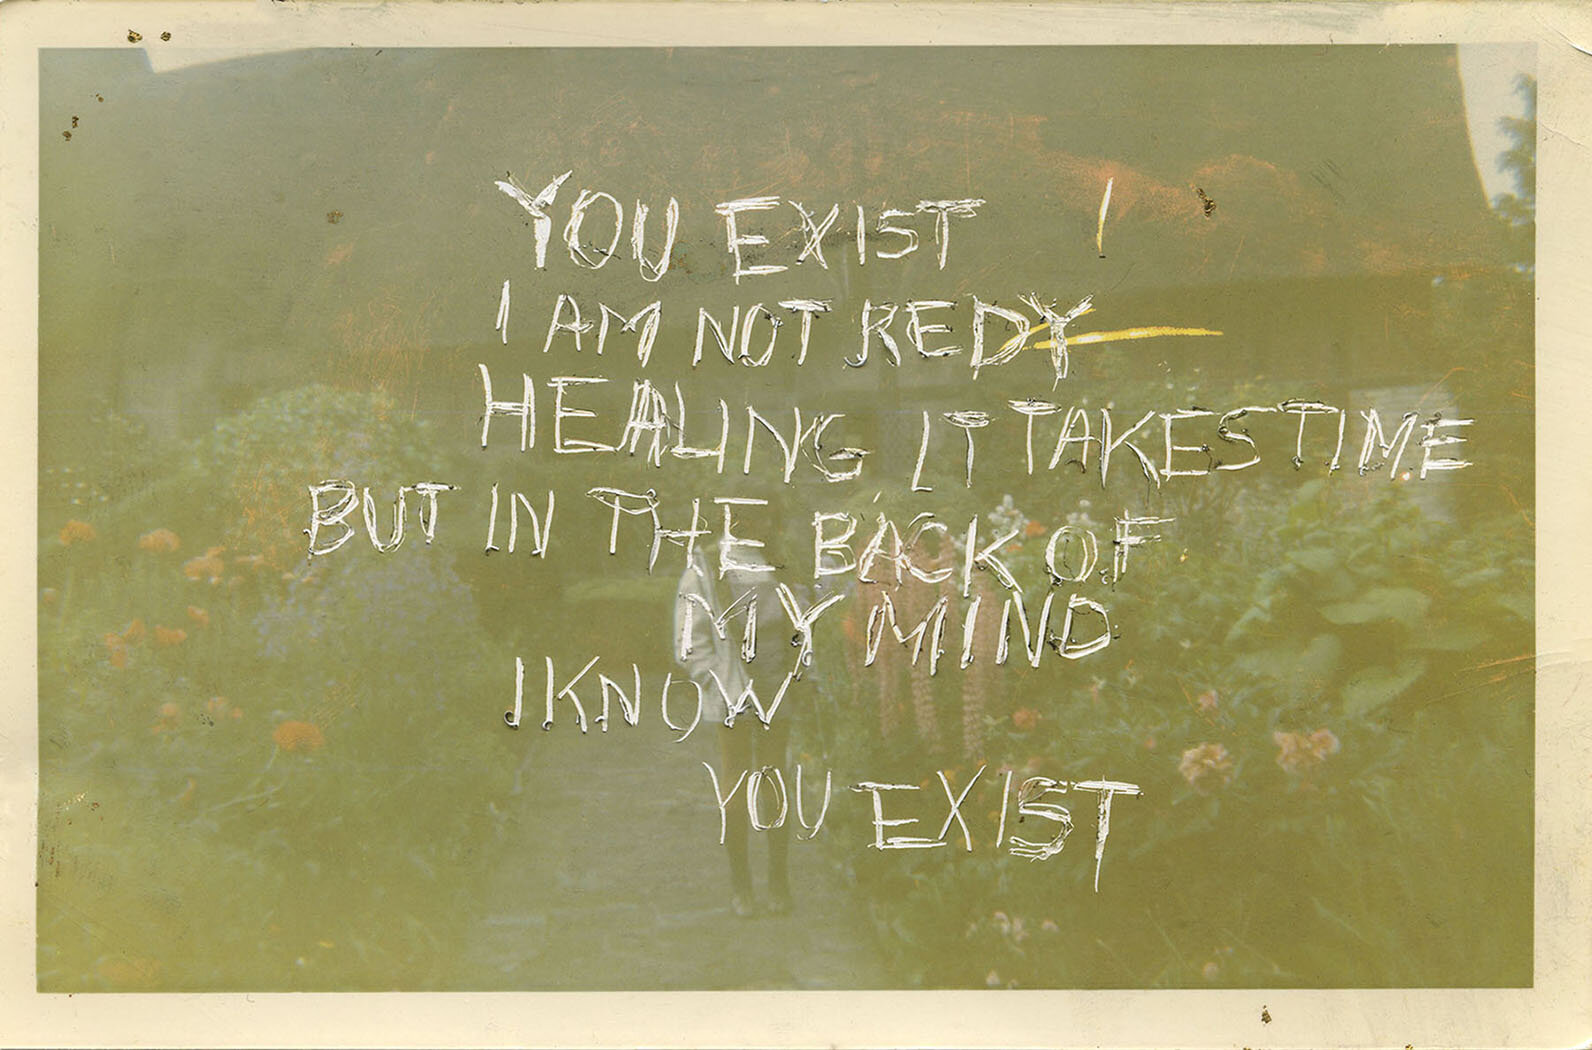  You exist. I am not redy. Healing, it takes time. But in the back of my mind I know, You exist. 